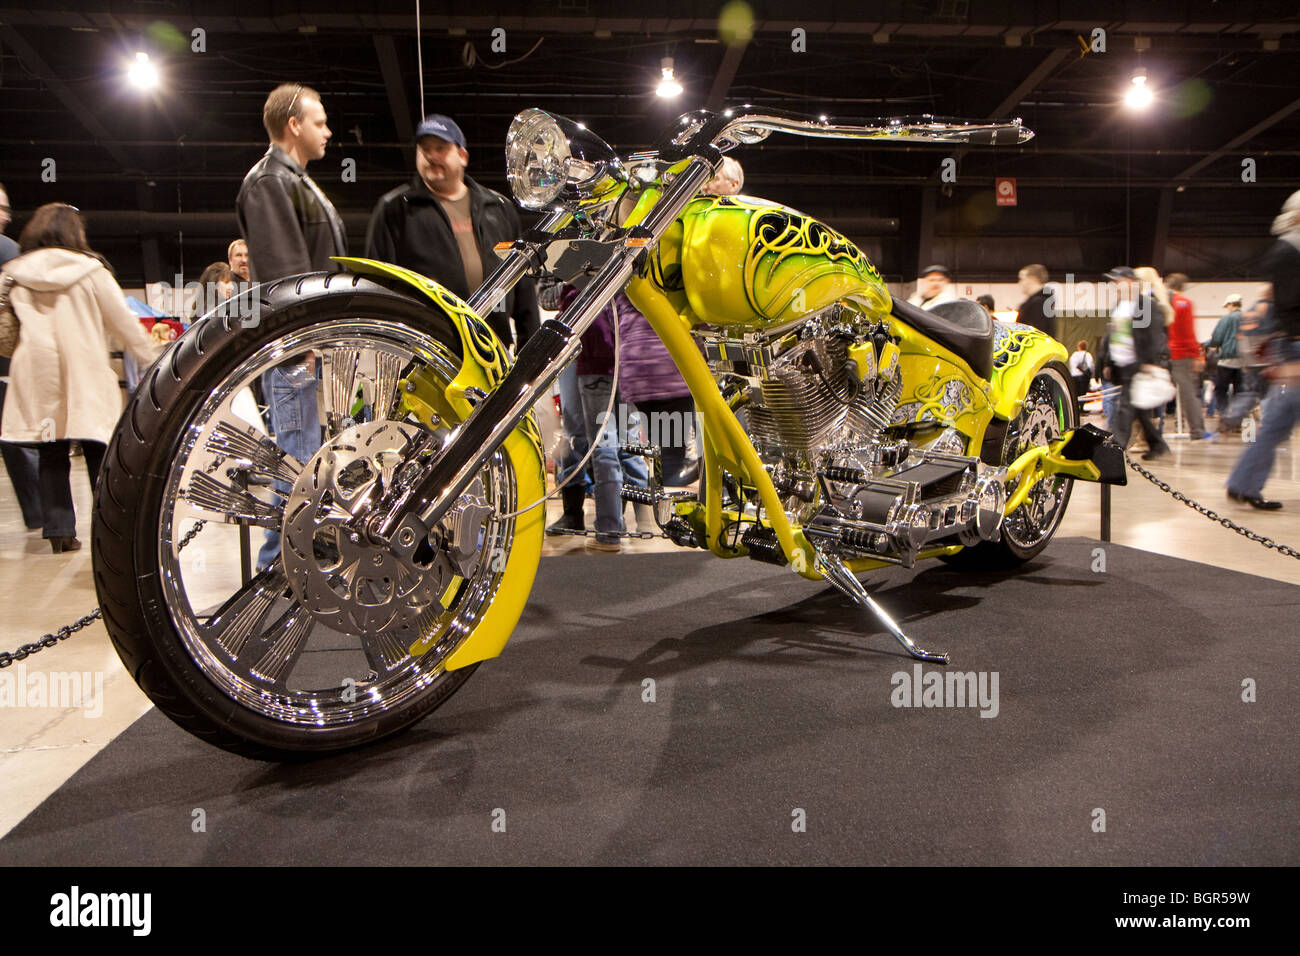 Shinny custom chopper on display with customers in a discussion behind Stock Photo